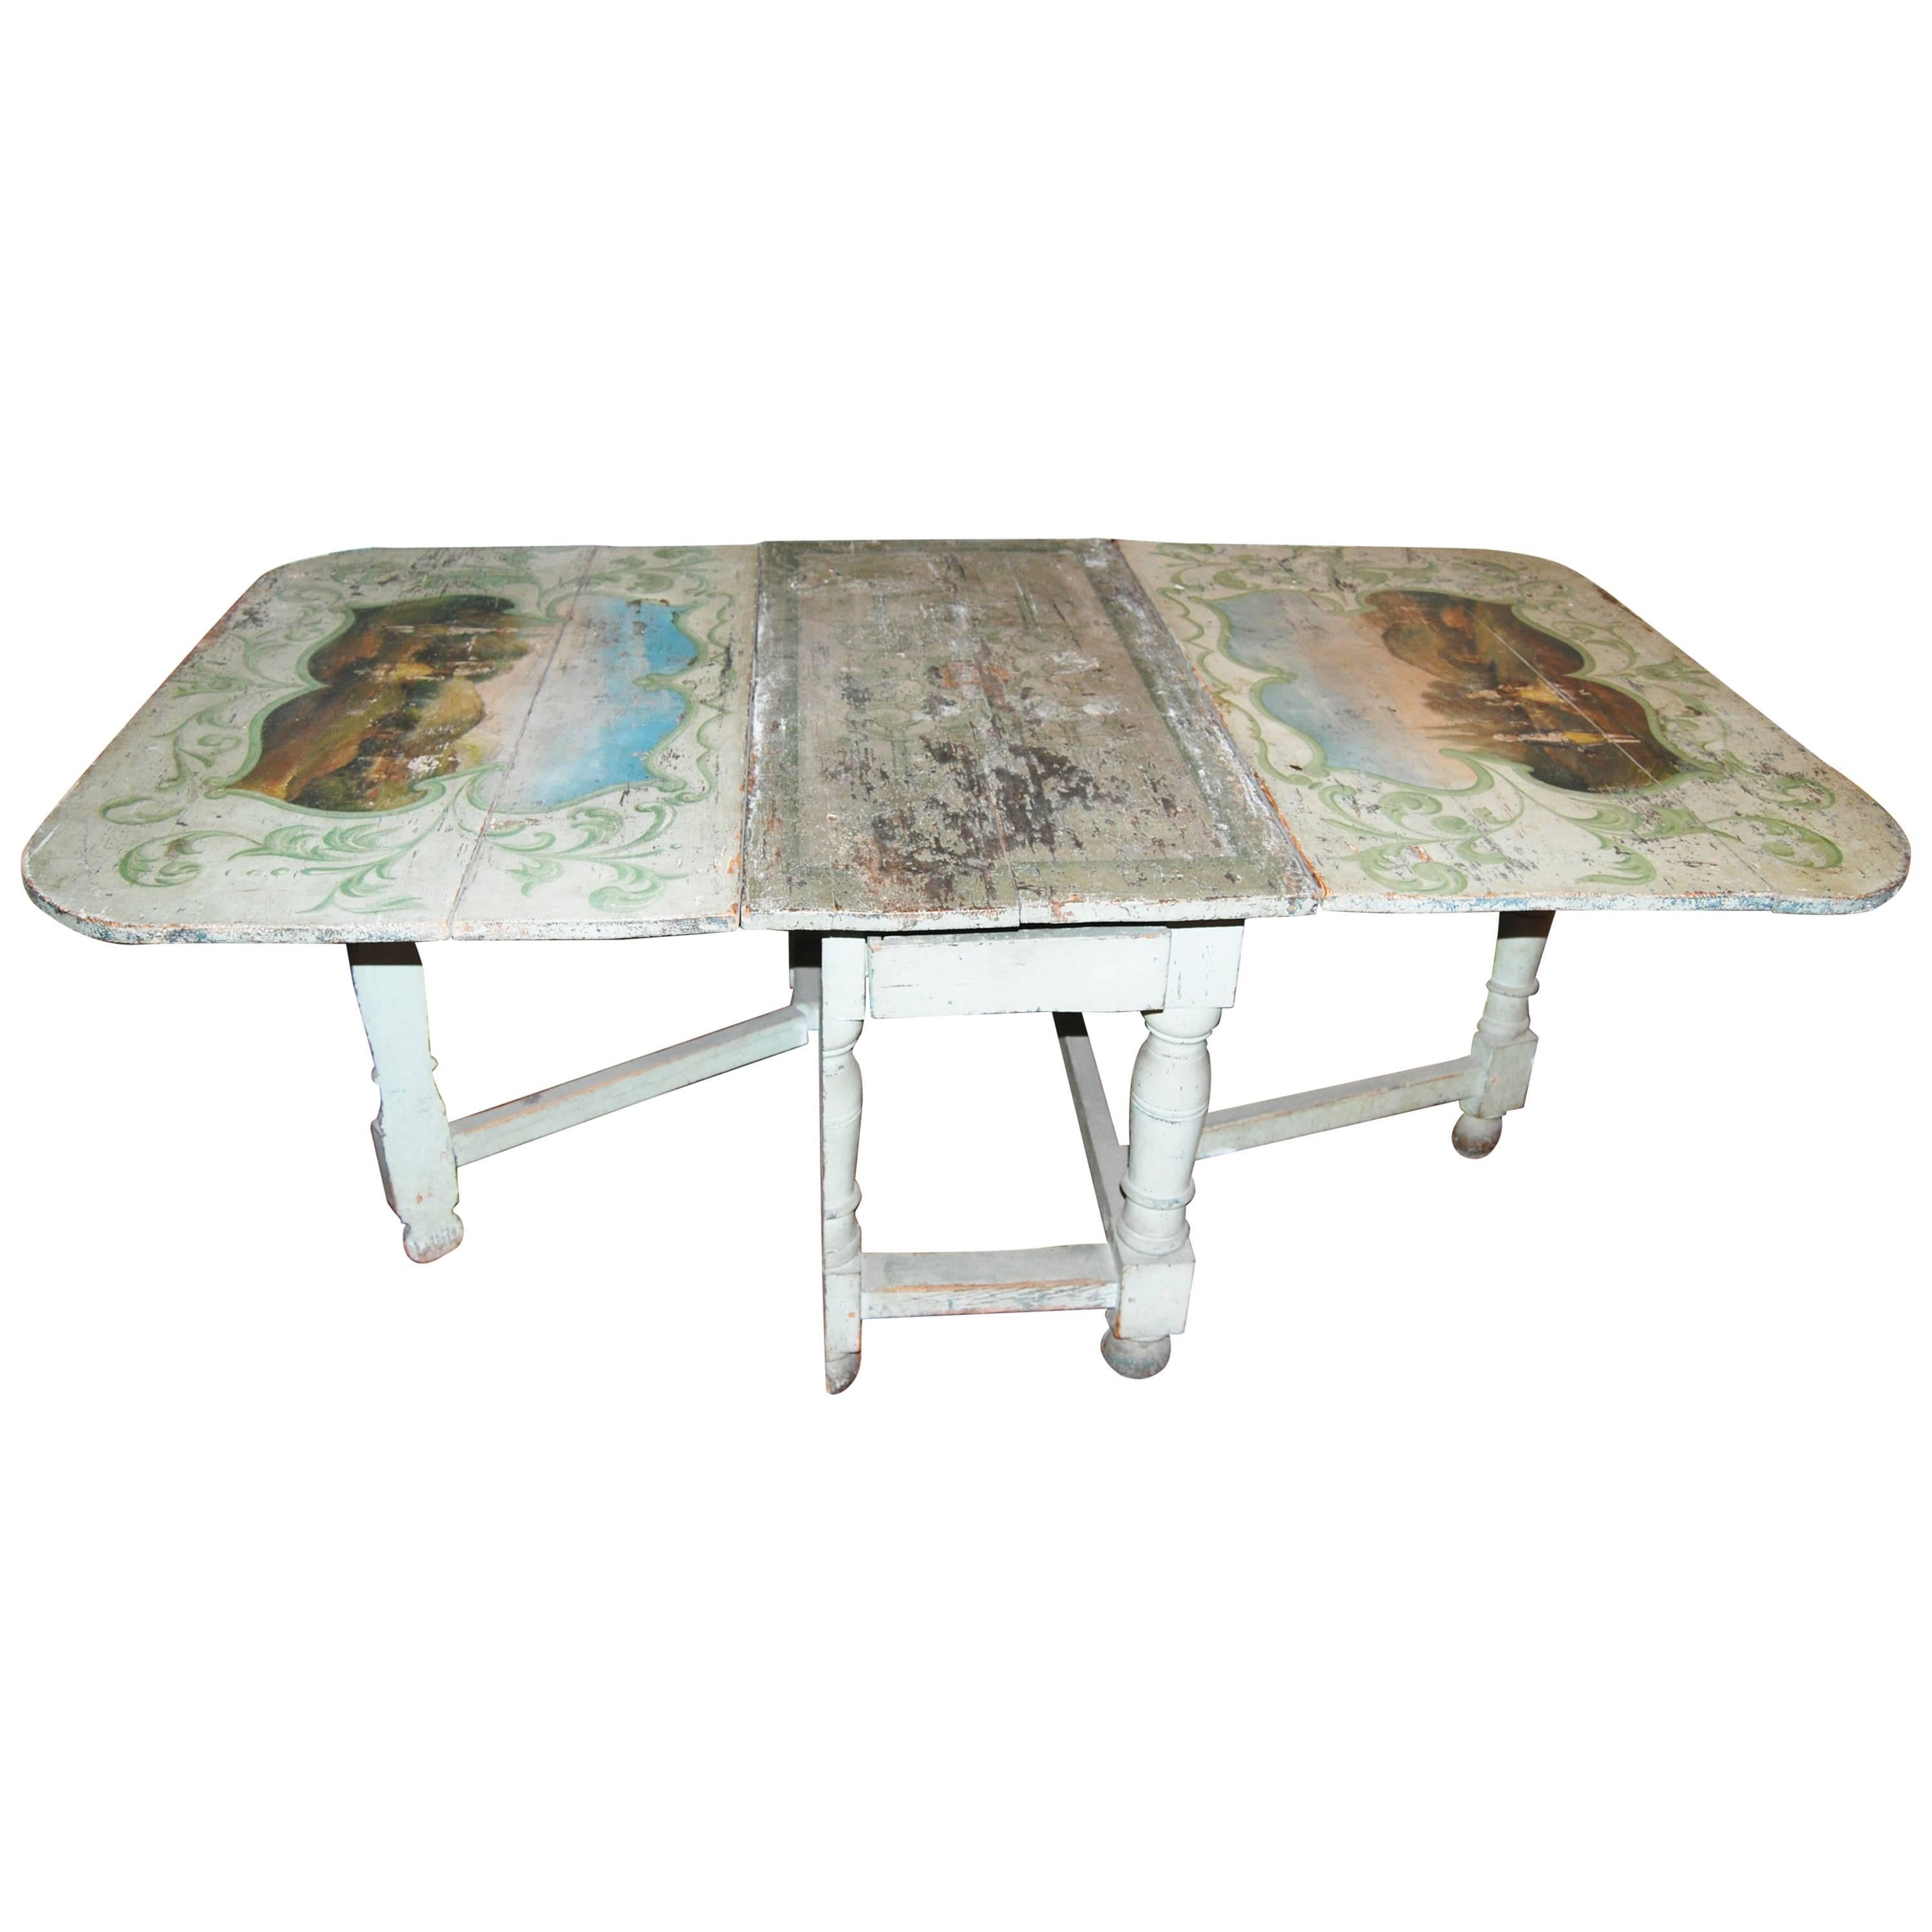 18th century Painted French Gateleg Table For Sale